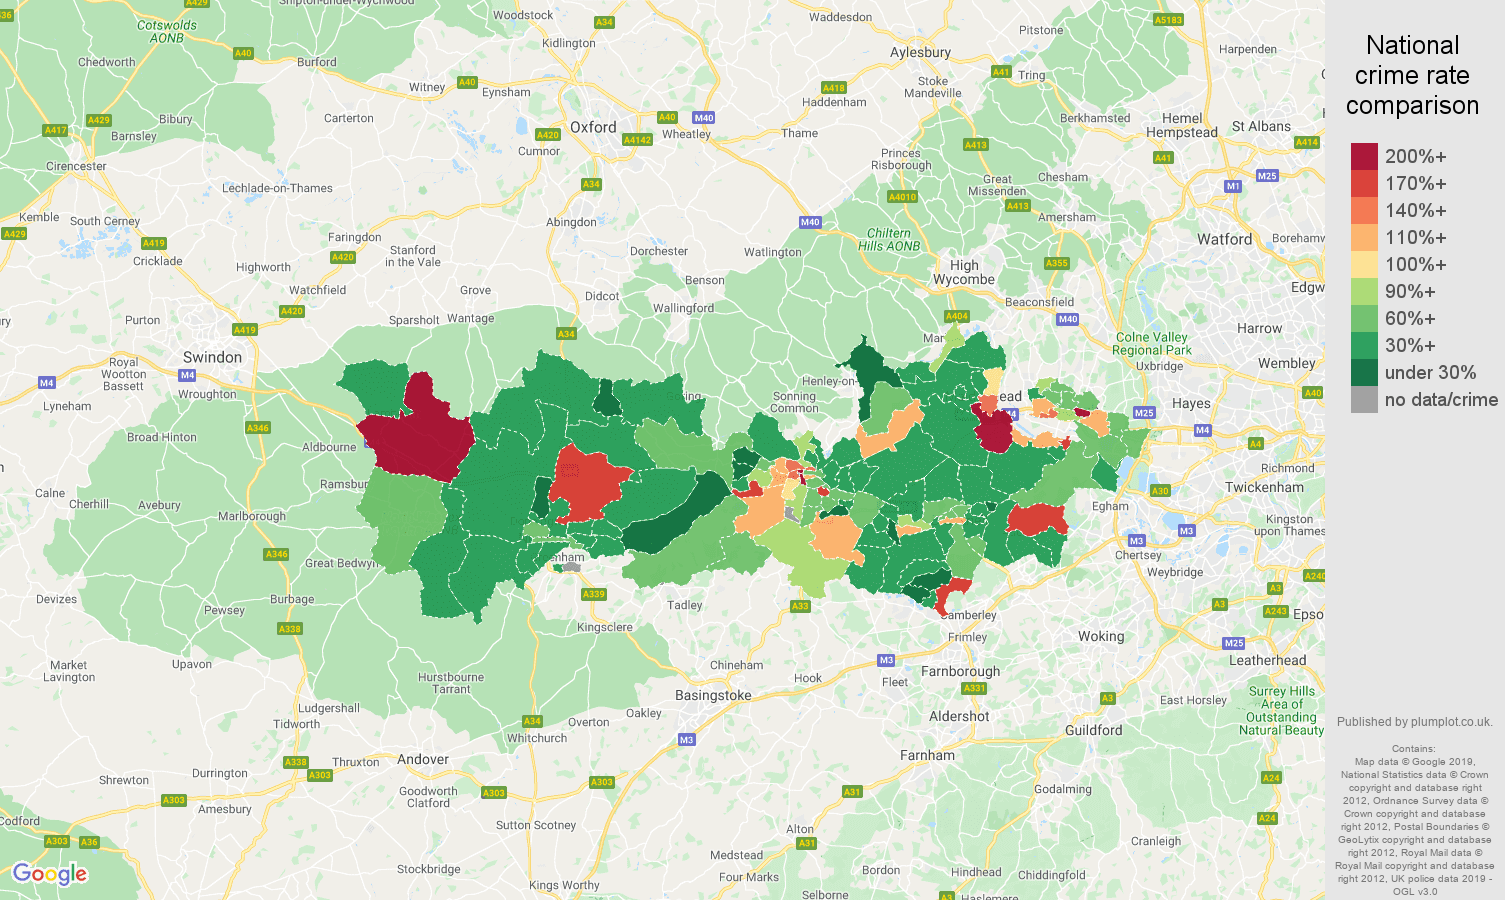 Berkshire other theft crime rate comparison map